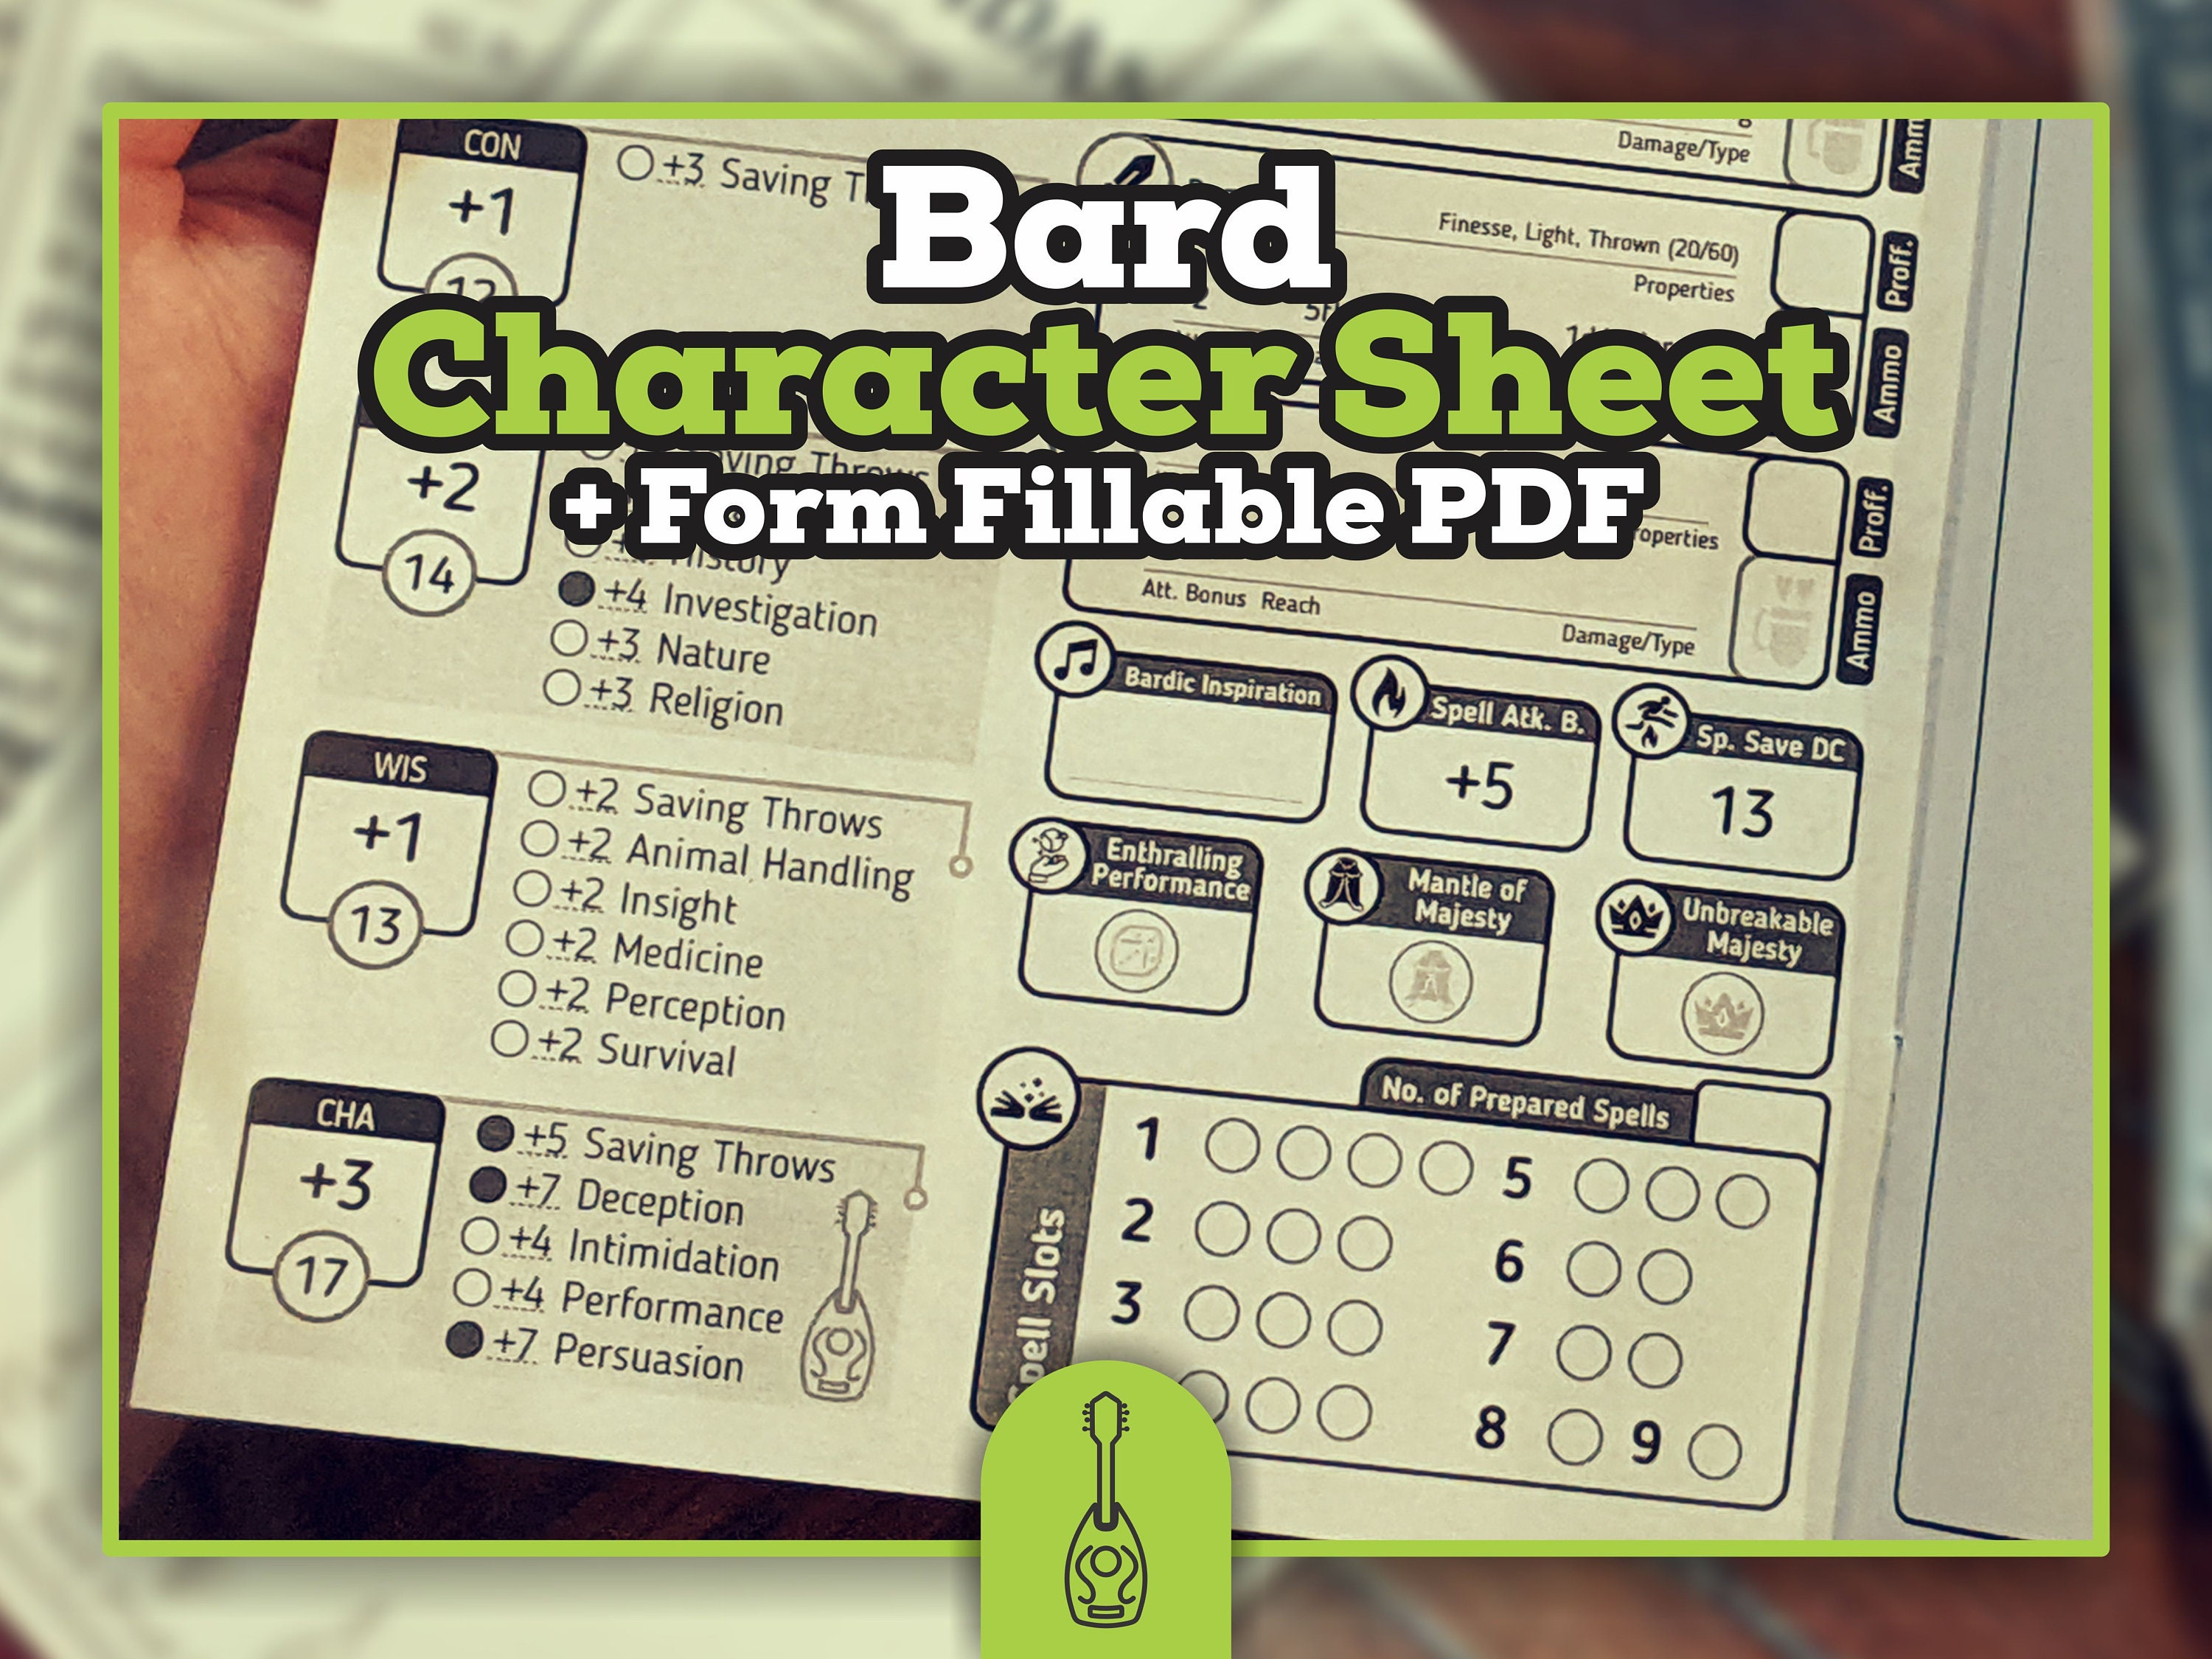 1. "Blue-haired bard" character concept - wide 3